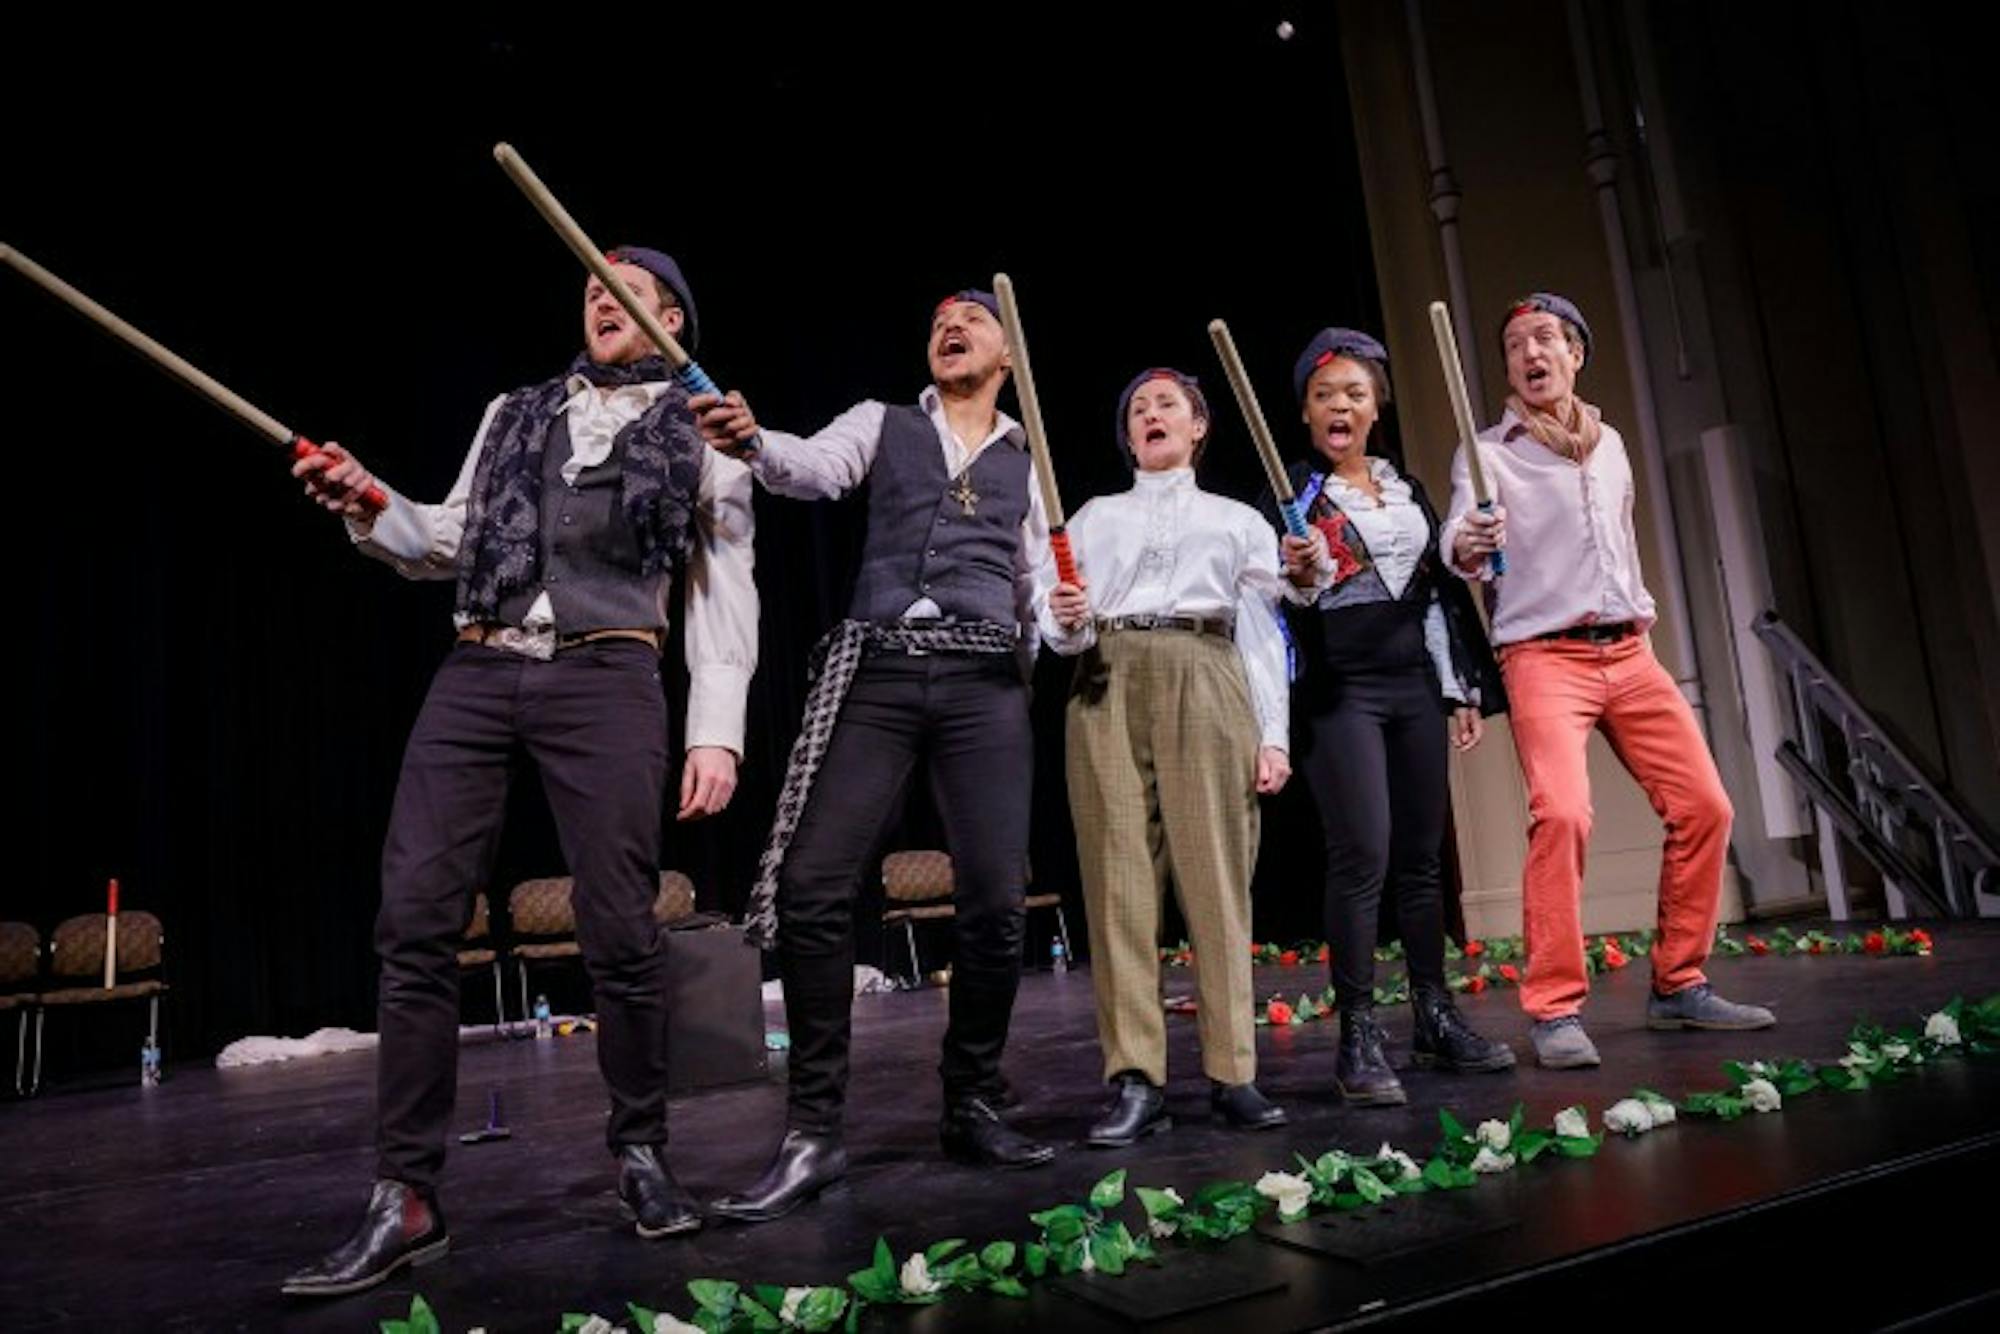 The Actors From the London Stage perform during their production of